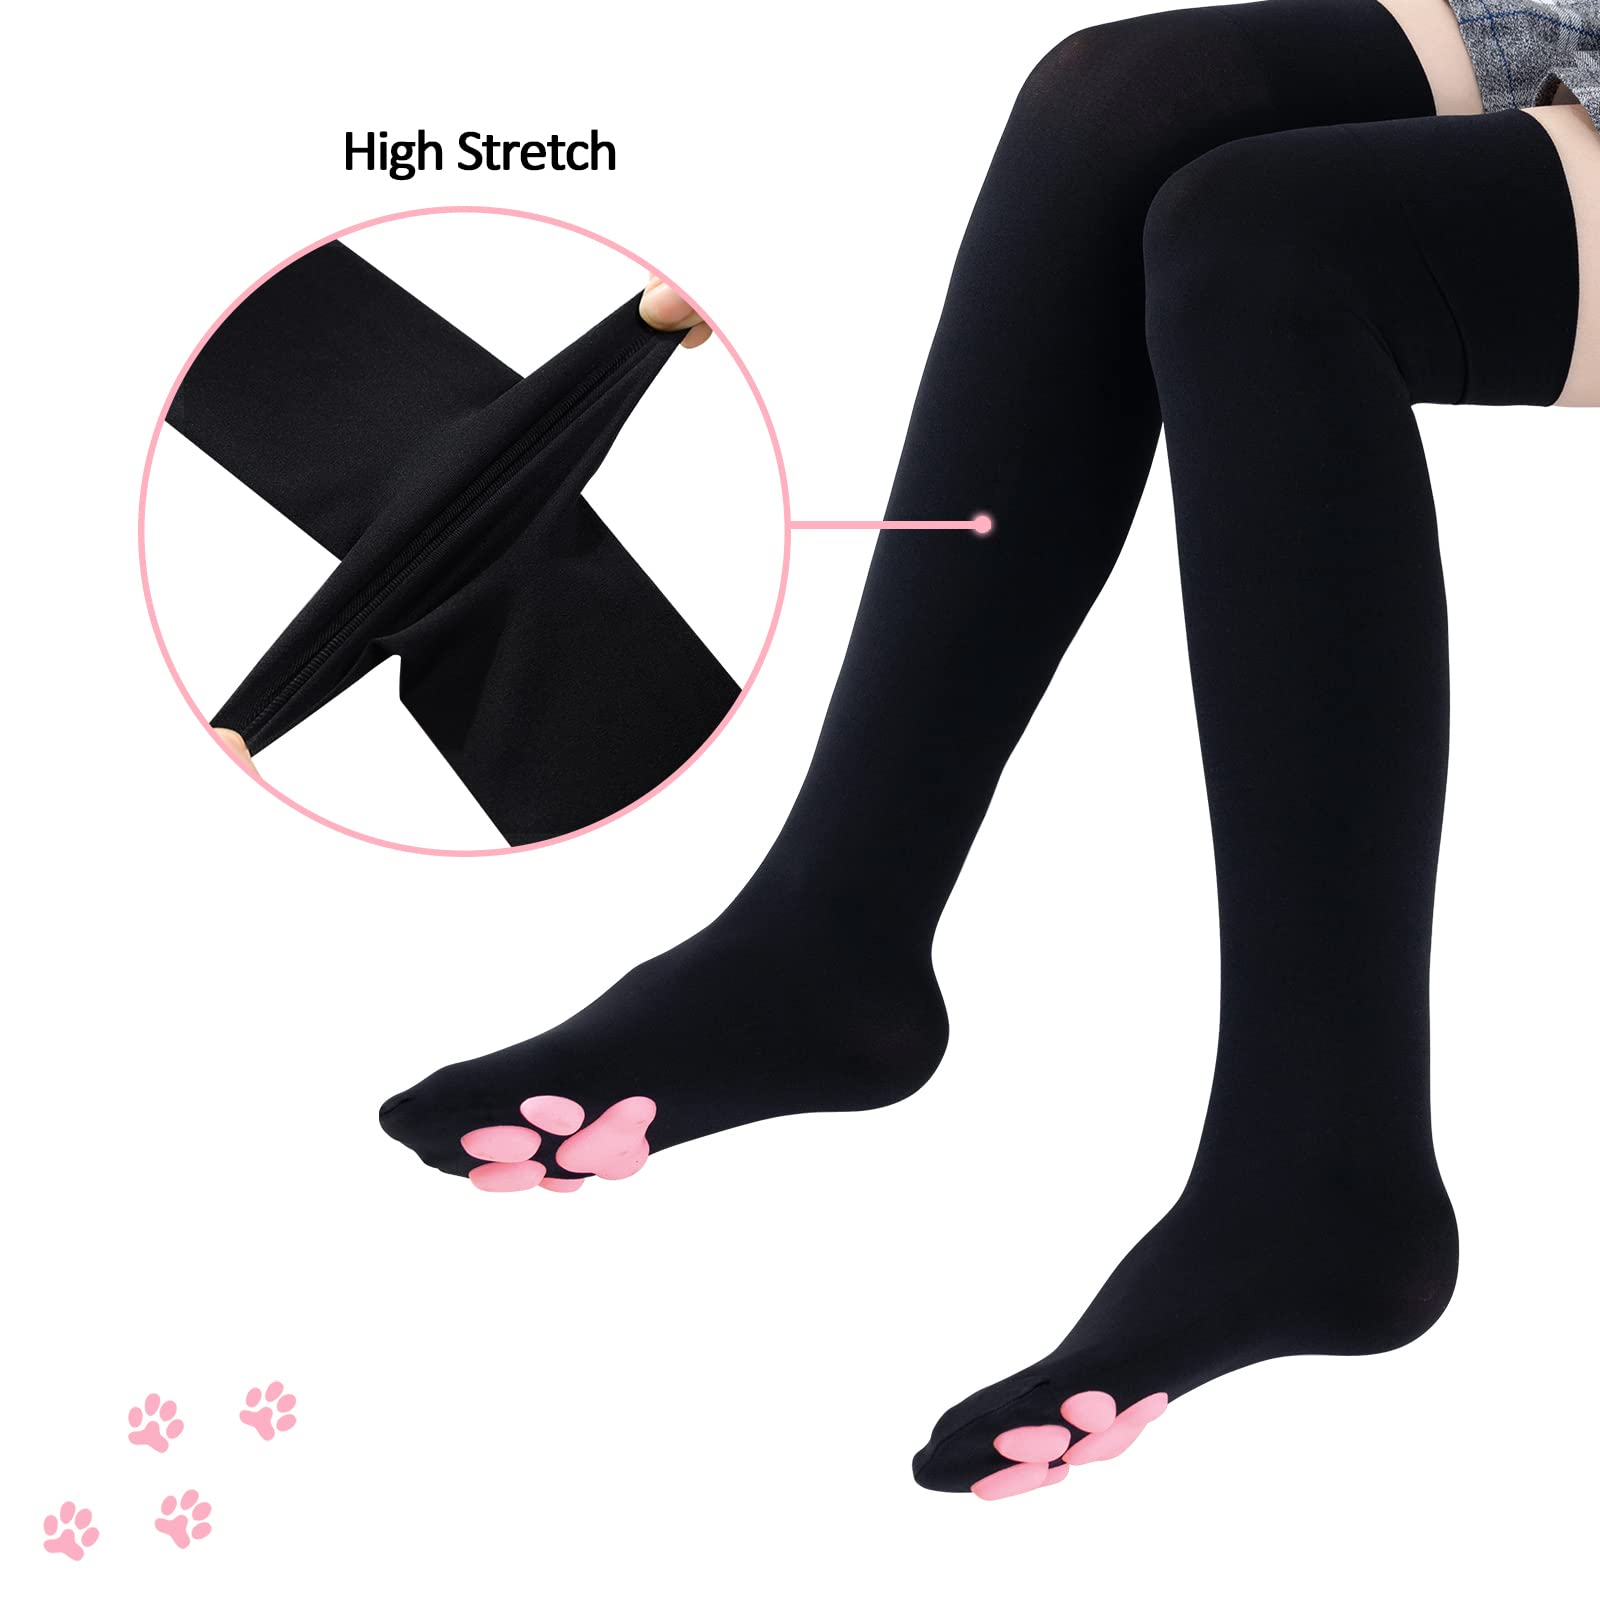 Littleforbig Thigh High Cosplay 3D Paw Pad Silicone Kitten Over The Knee Silk Stockings - Black